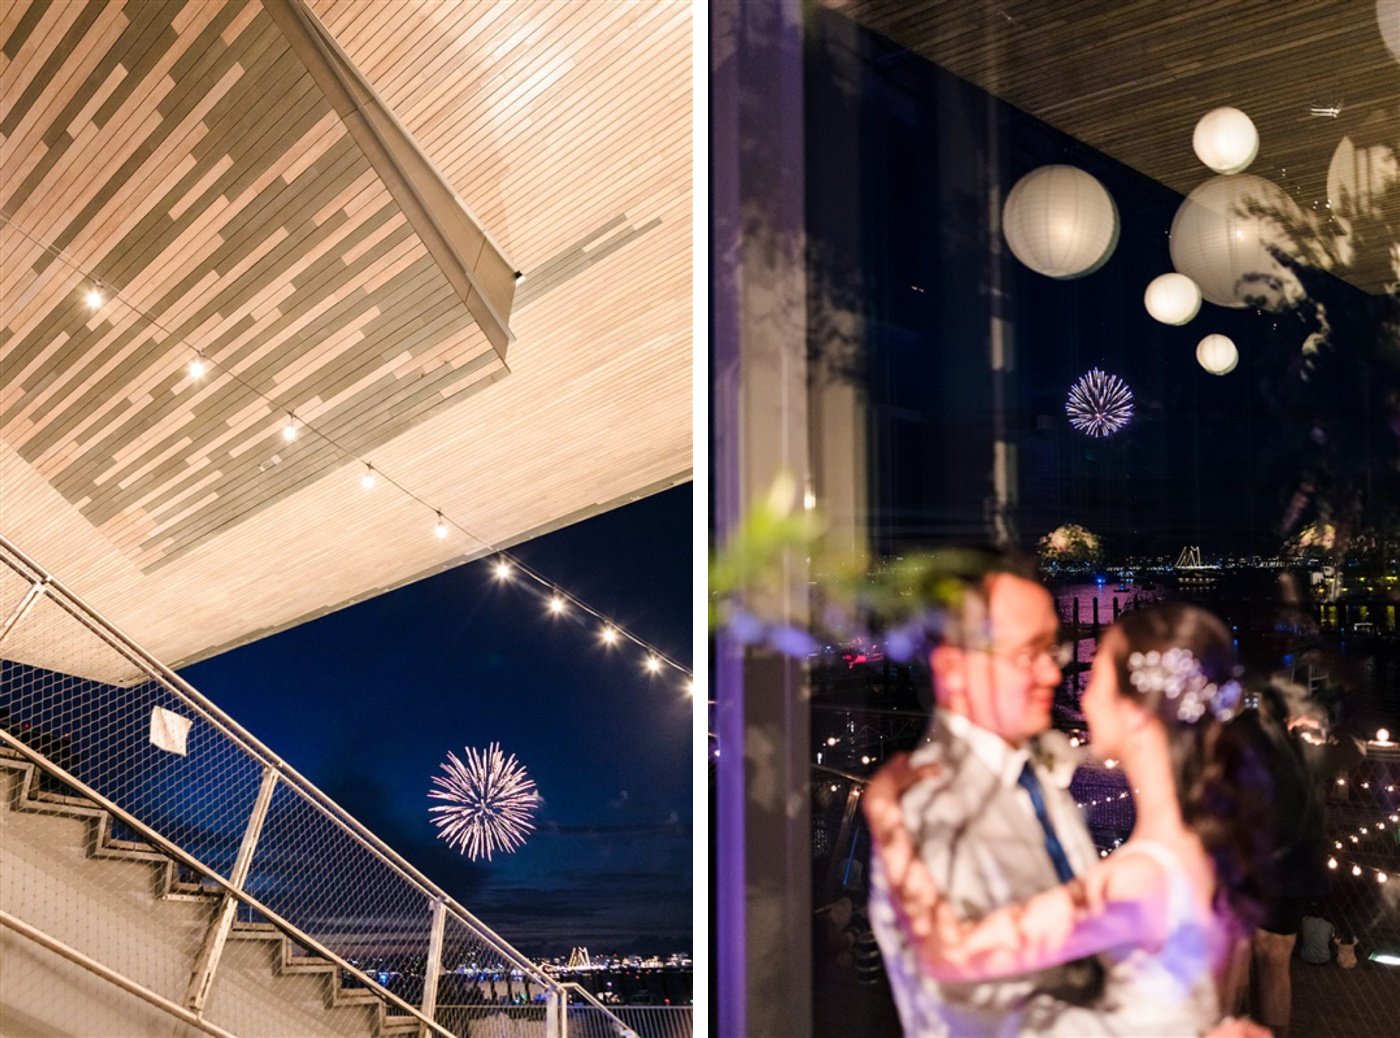 Fireworks over the Boston Harbor after a wedding at the Institute of Contemporary Art